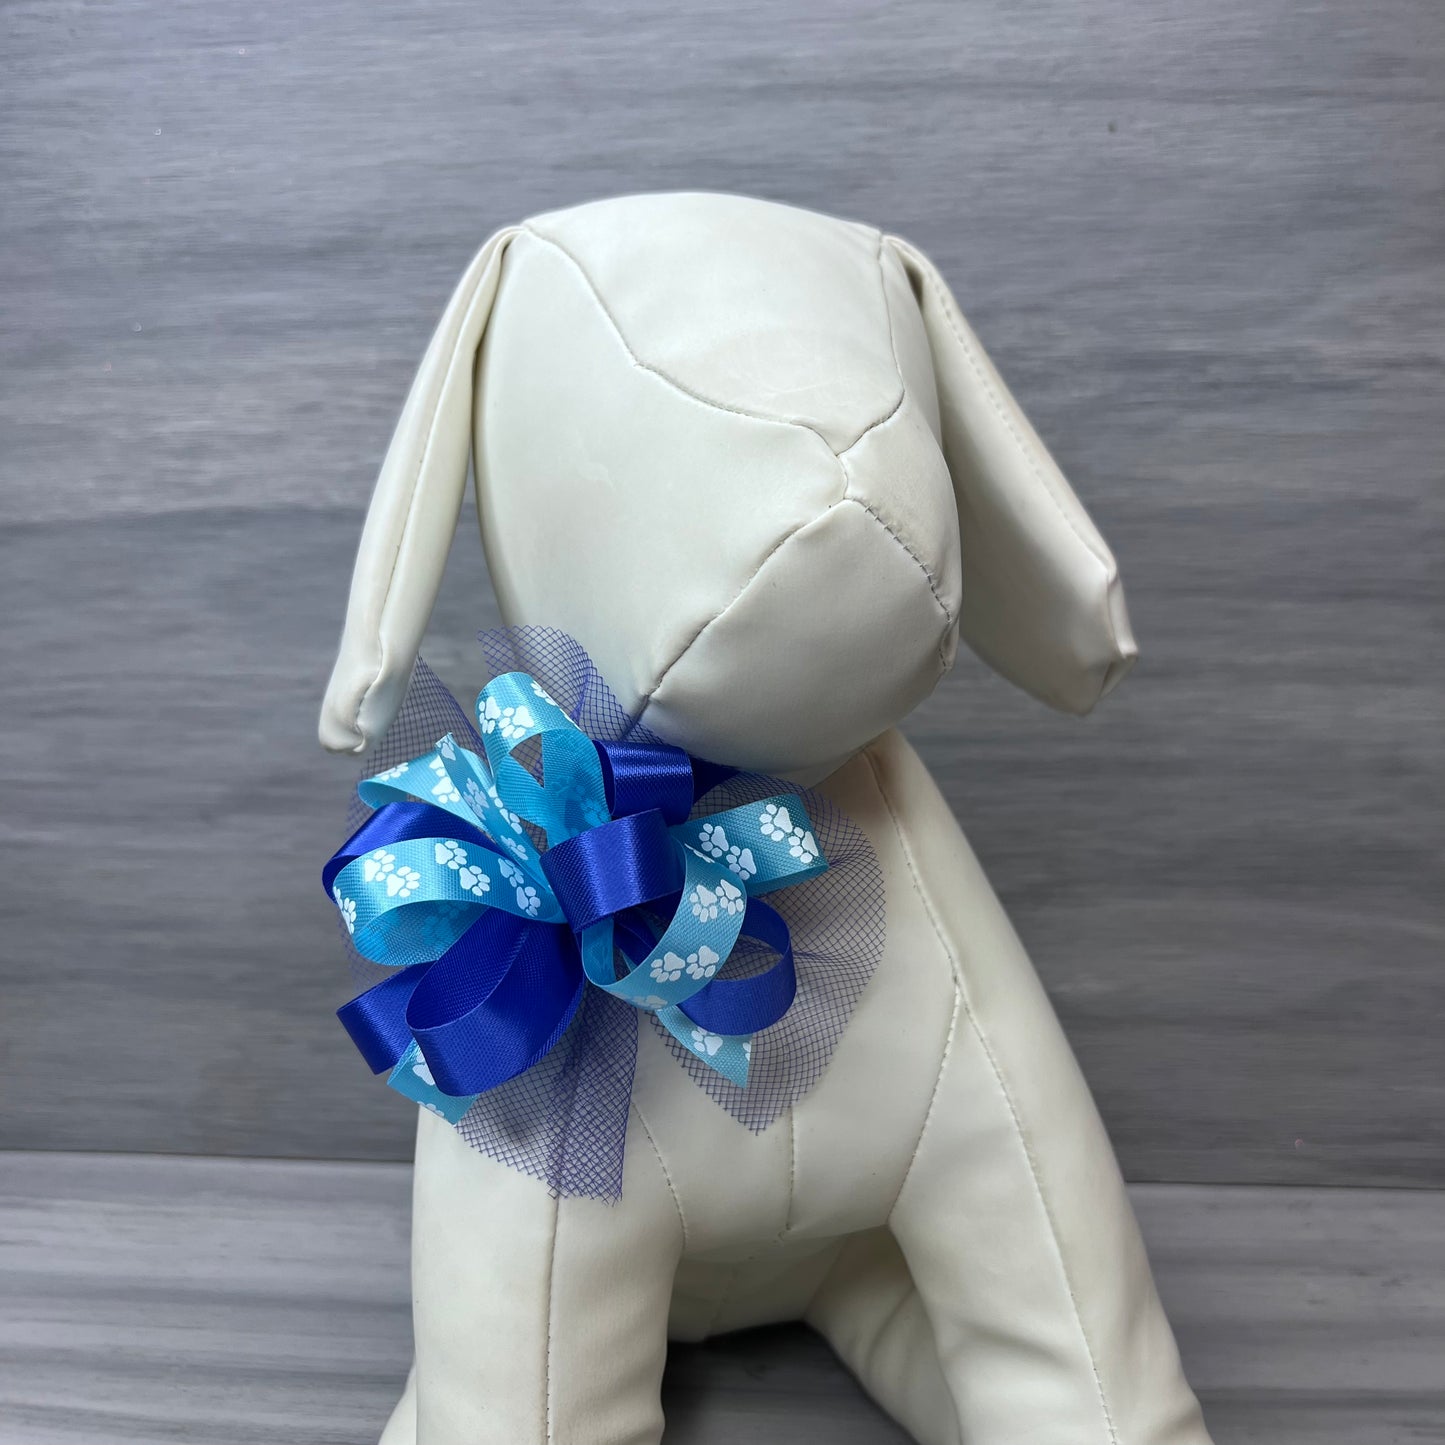 Winter Snow - Collar Bows - 8 Extra Large Bows